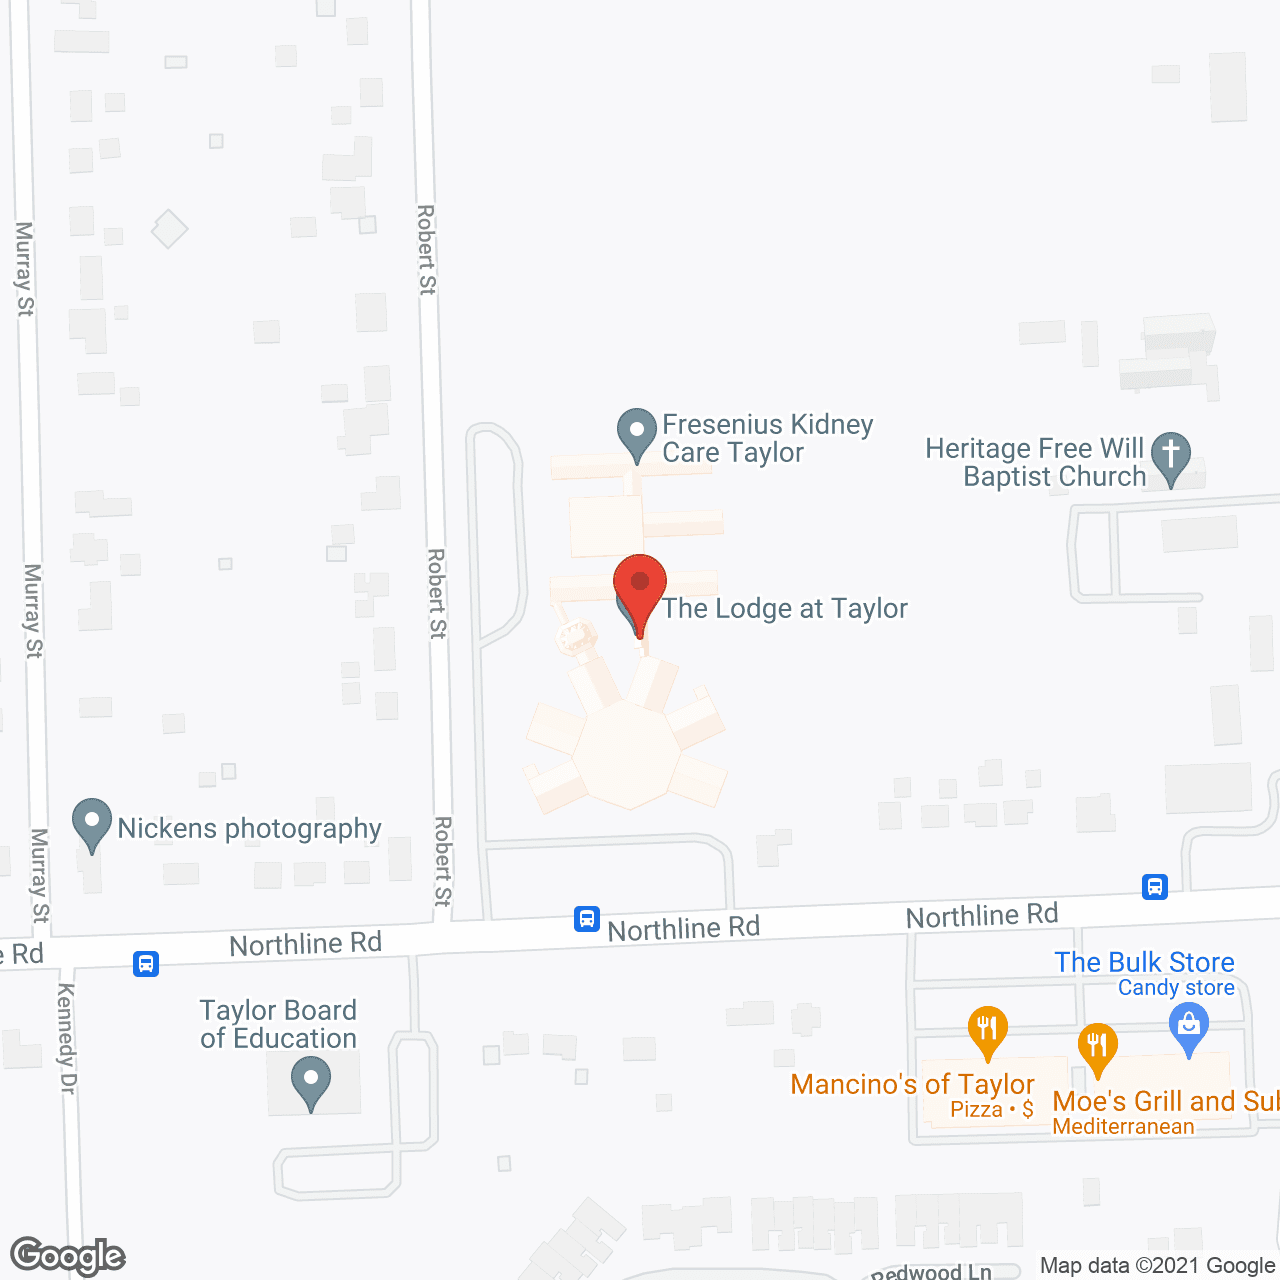 Taylor Total Living Ctr in google map